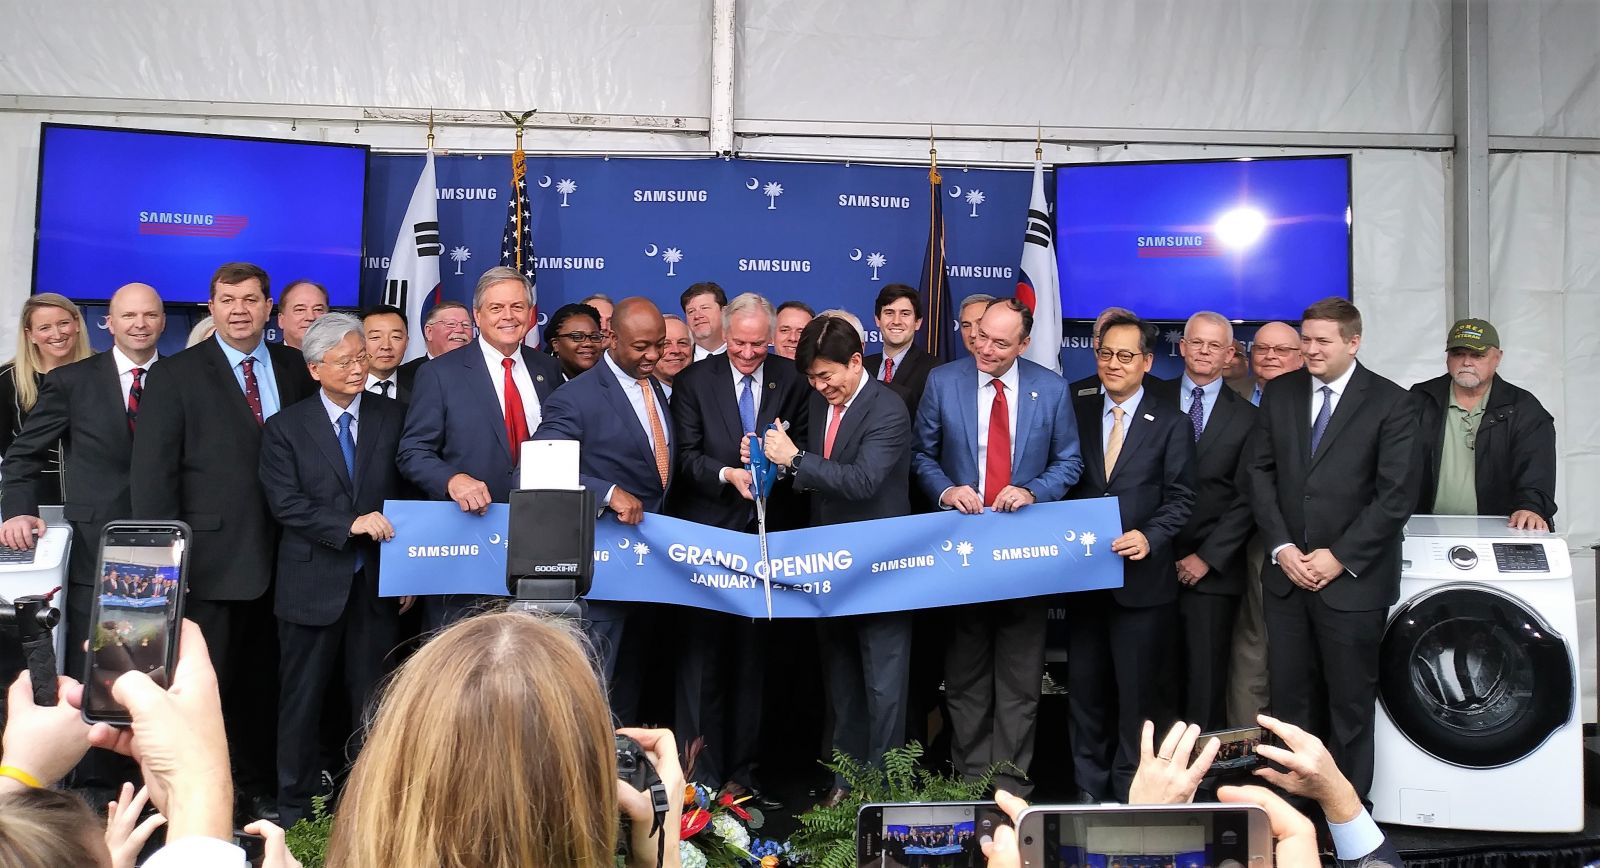 State leaders including Gov. Henry McMaster (center) and U.S. Sen. Tim Scott (left of McMaster) celebrated the grand opening of Samsung's Newberry manufacturing plant on Friday. (Photo/Travis Boland)